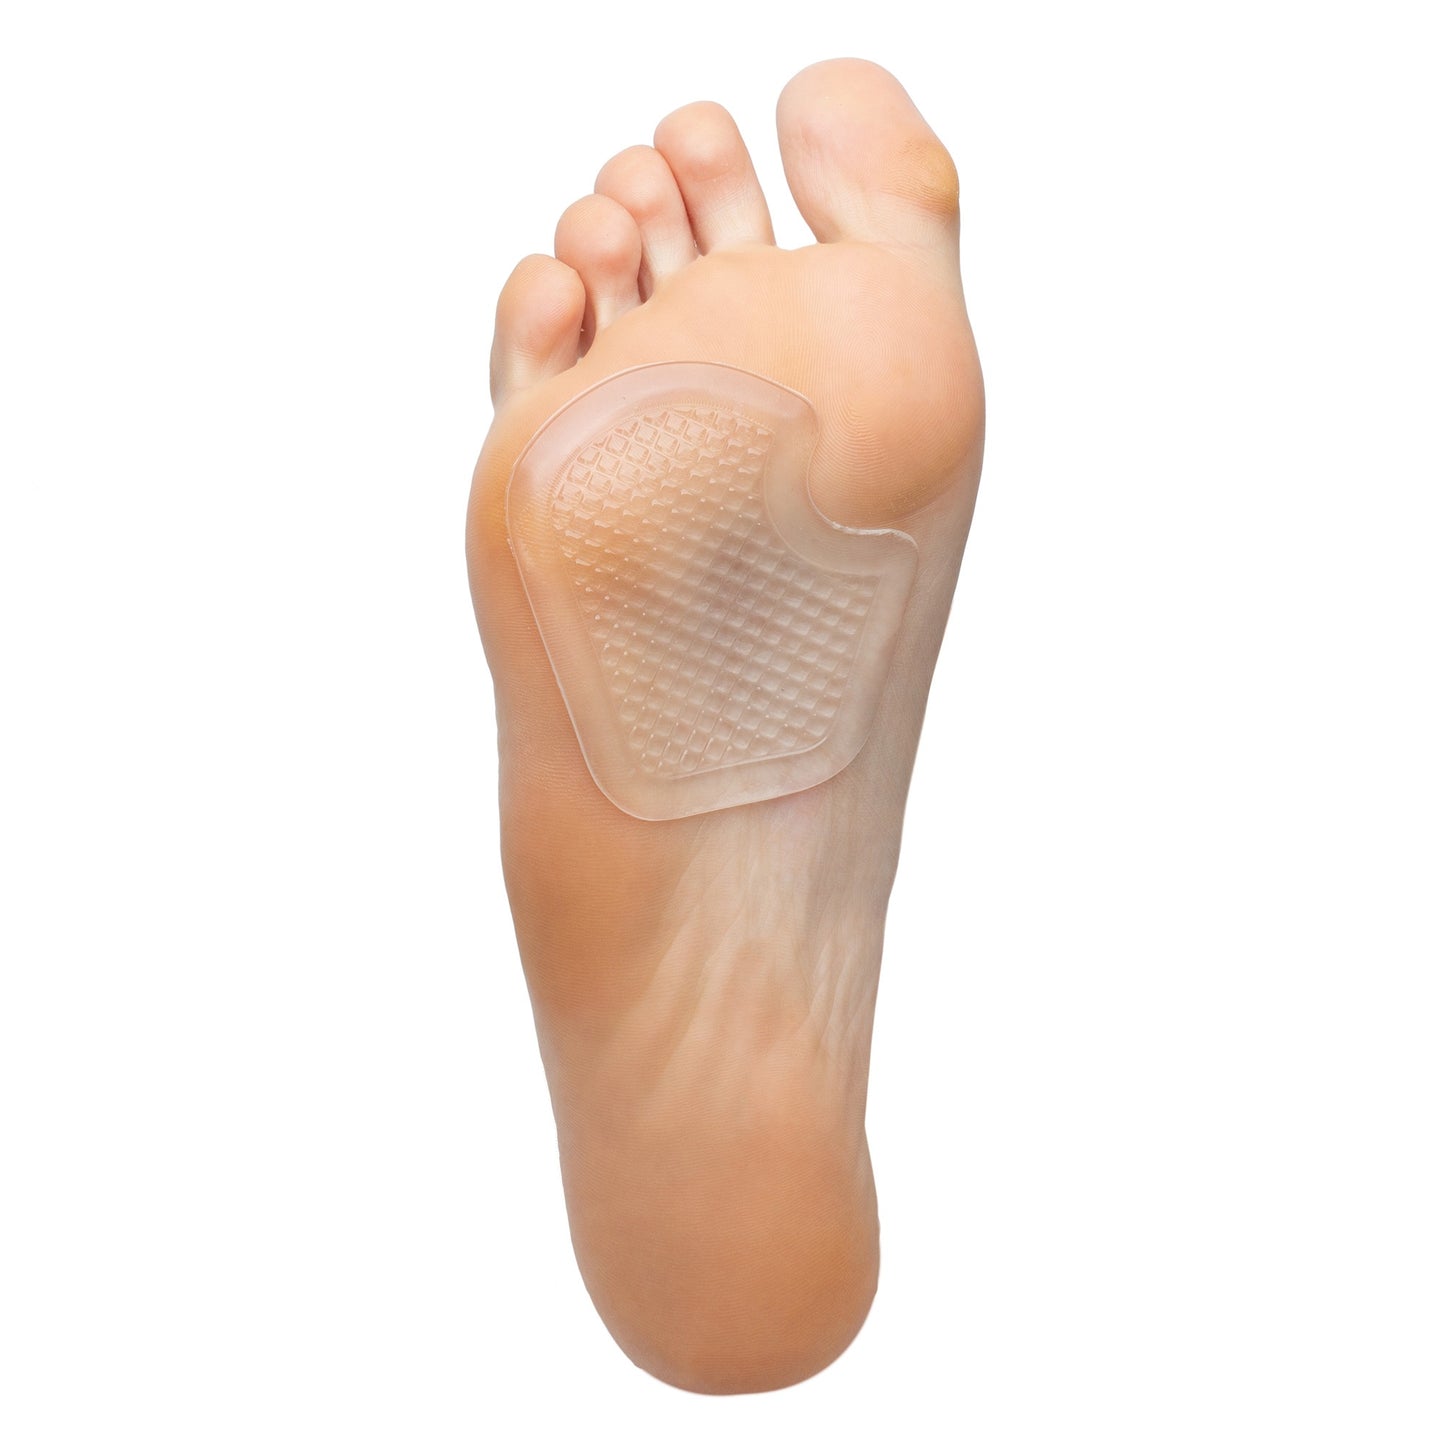 Metatarsal Pads for Ball of Foot